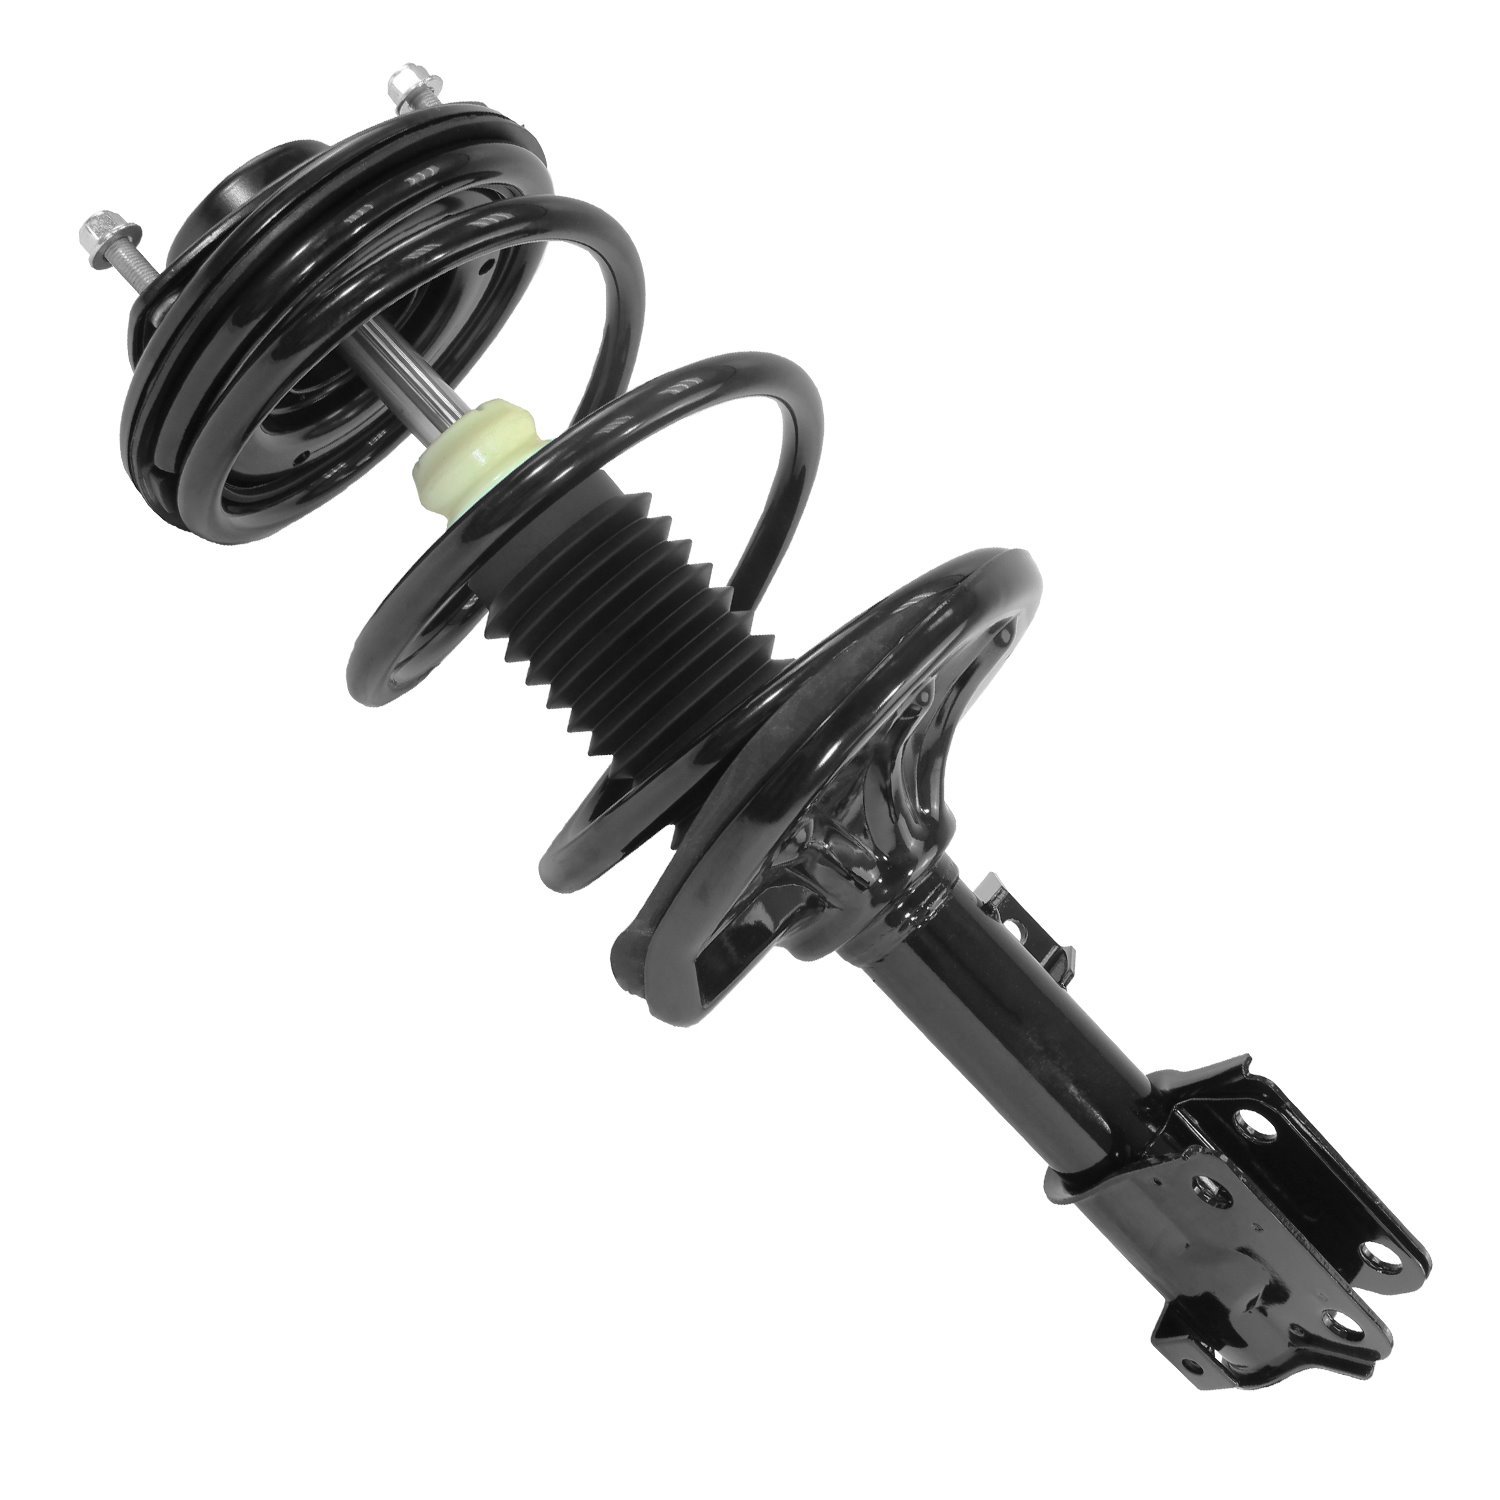 13702 Front Suspension Strut & Coil Spring Assemby Fits Select Mitsubishi Eclipse